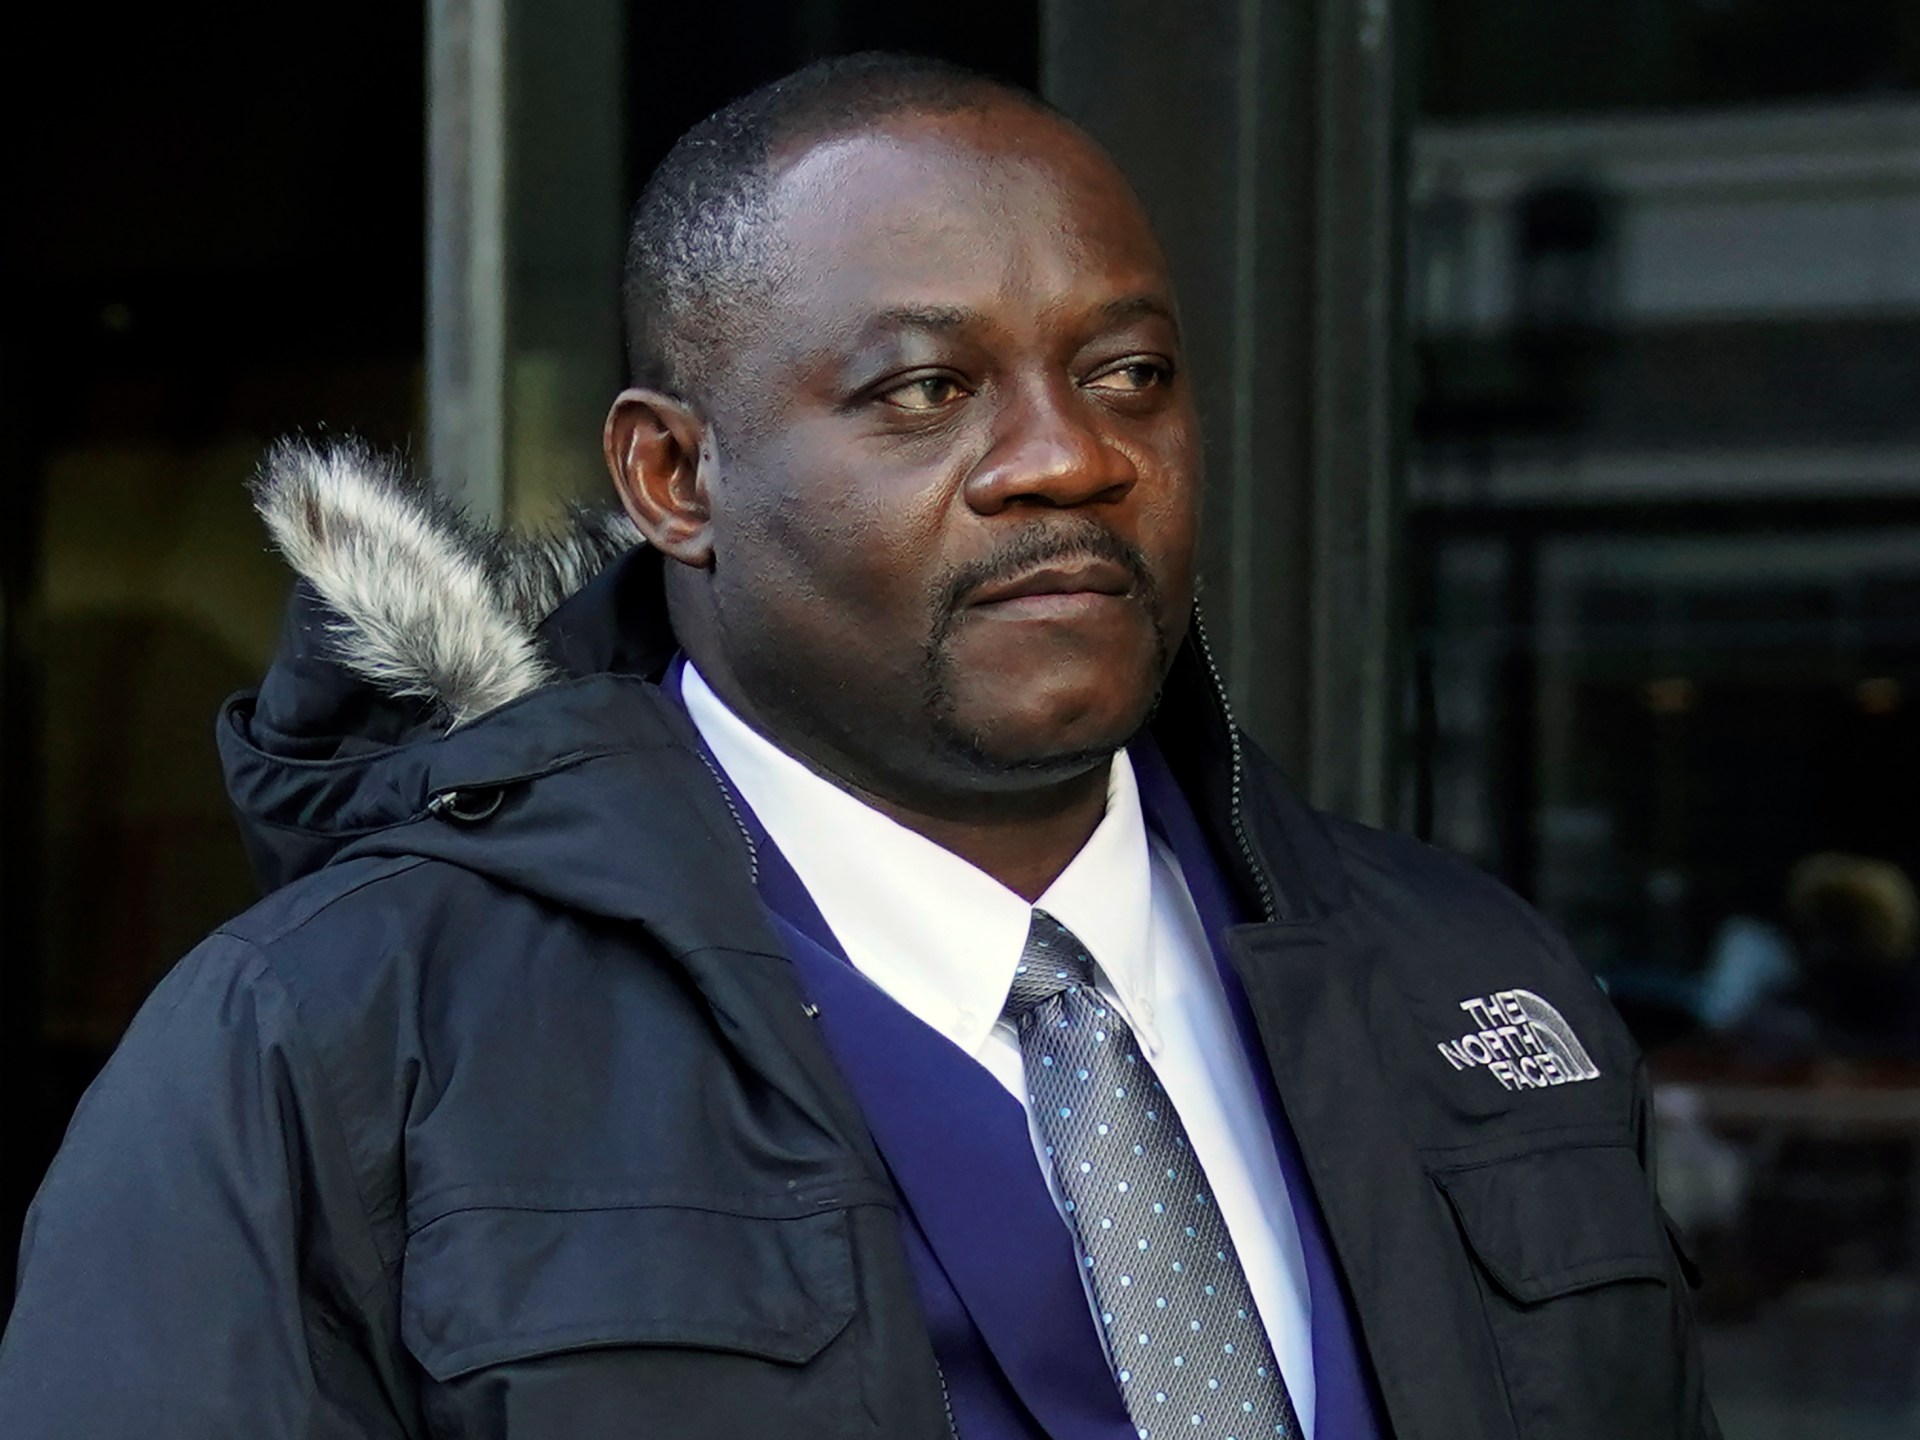 Haitian mayor, accused of persecution, is arrested for visa fraud